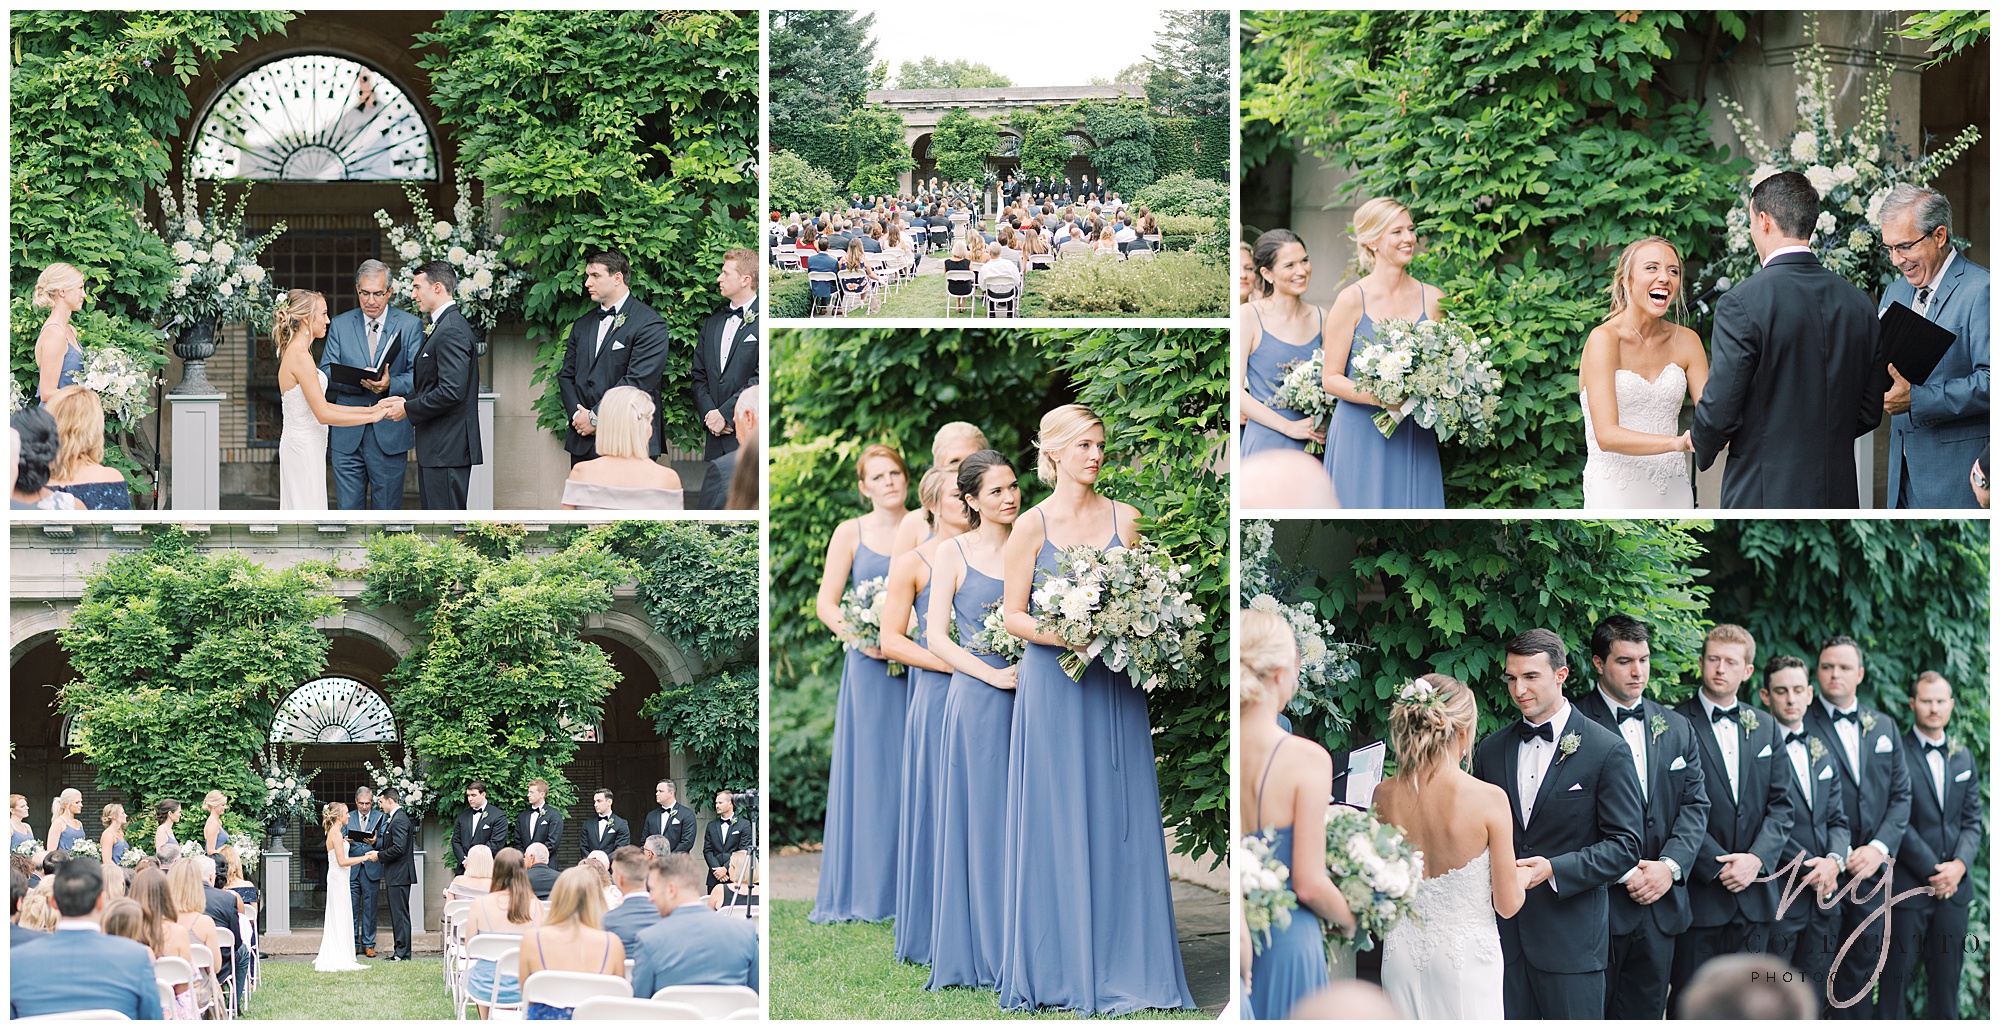 wedding_at_the_George_eastman_house_Rochester_NY_0173.jpg